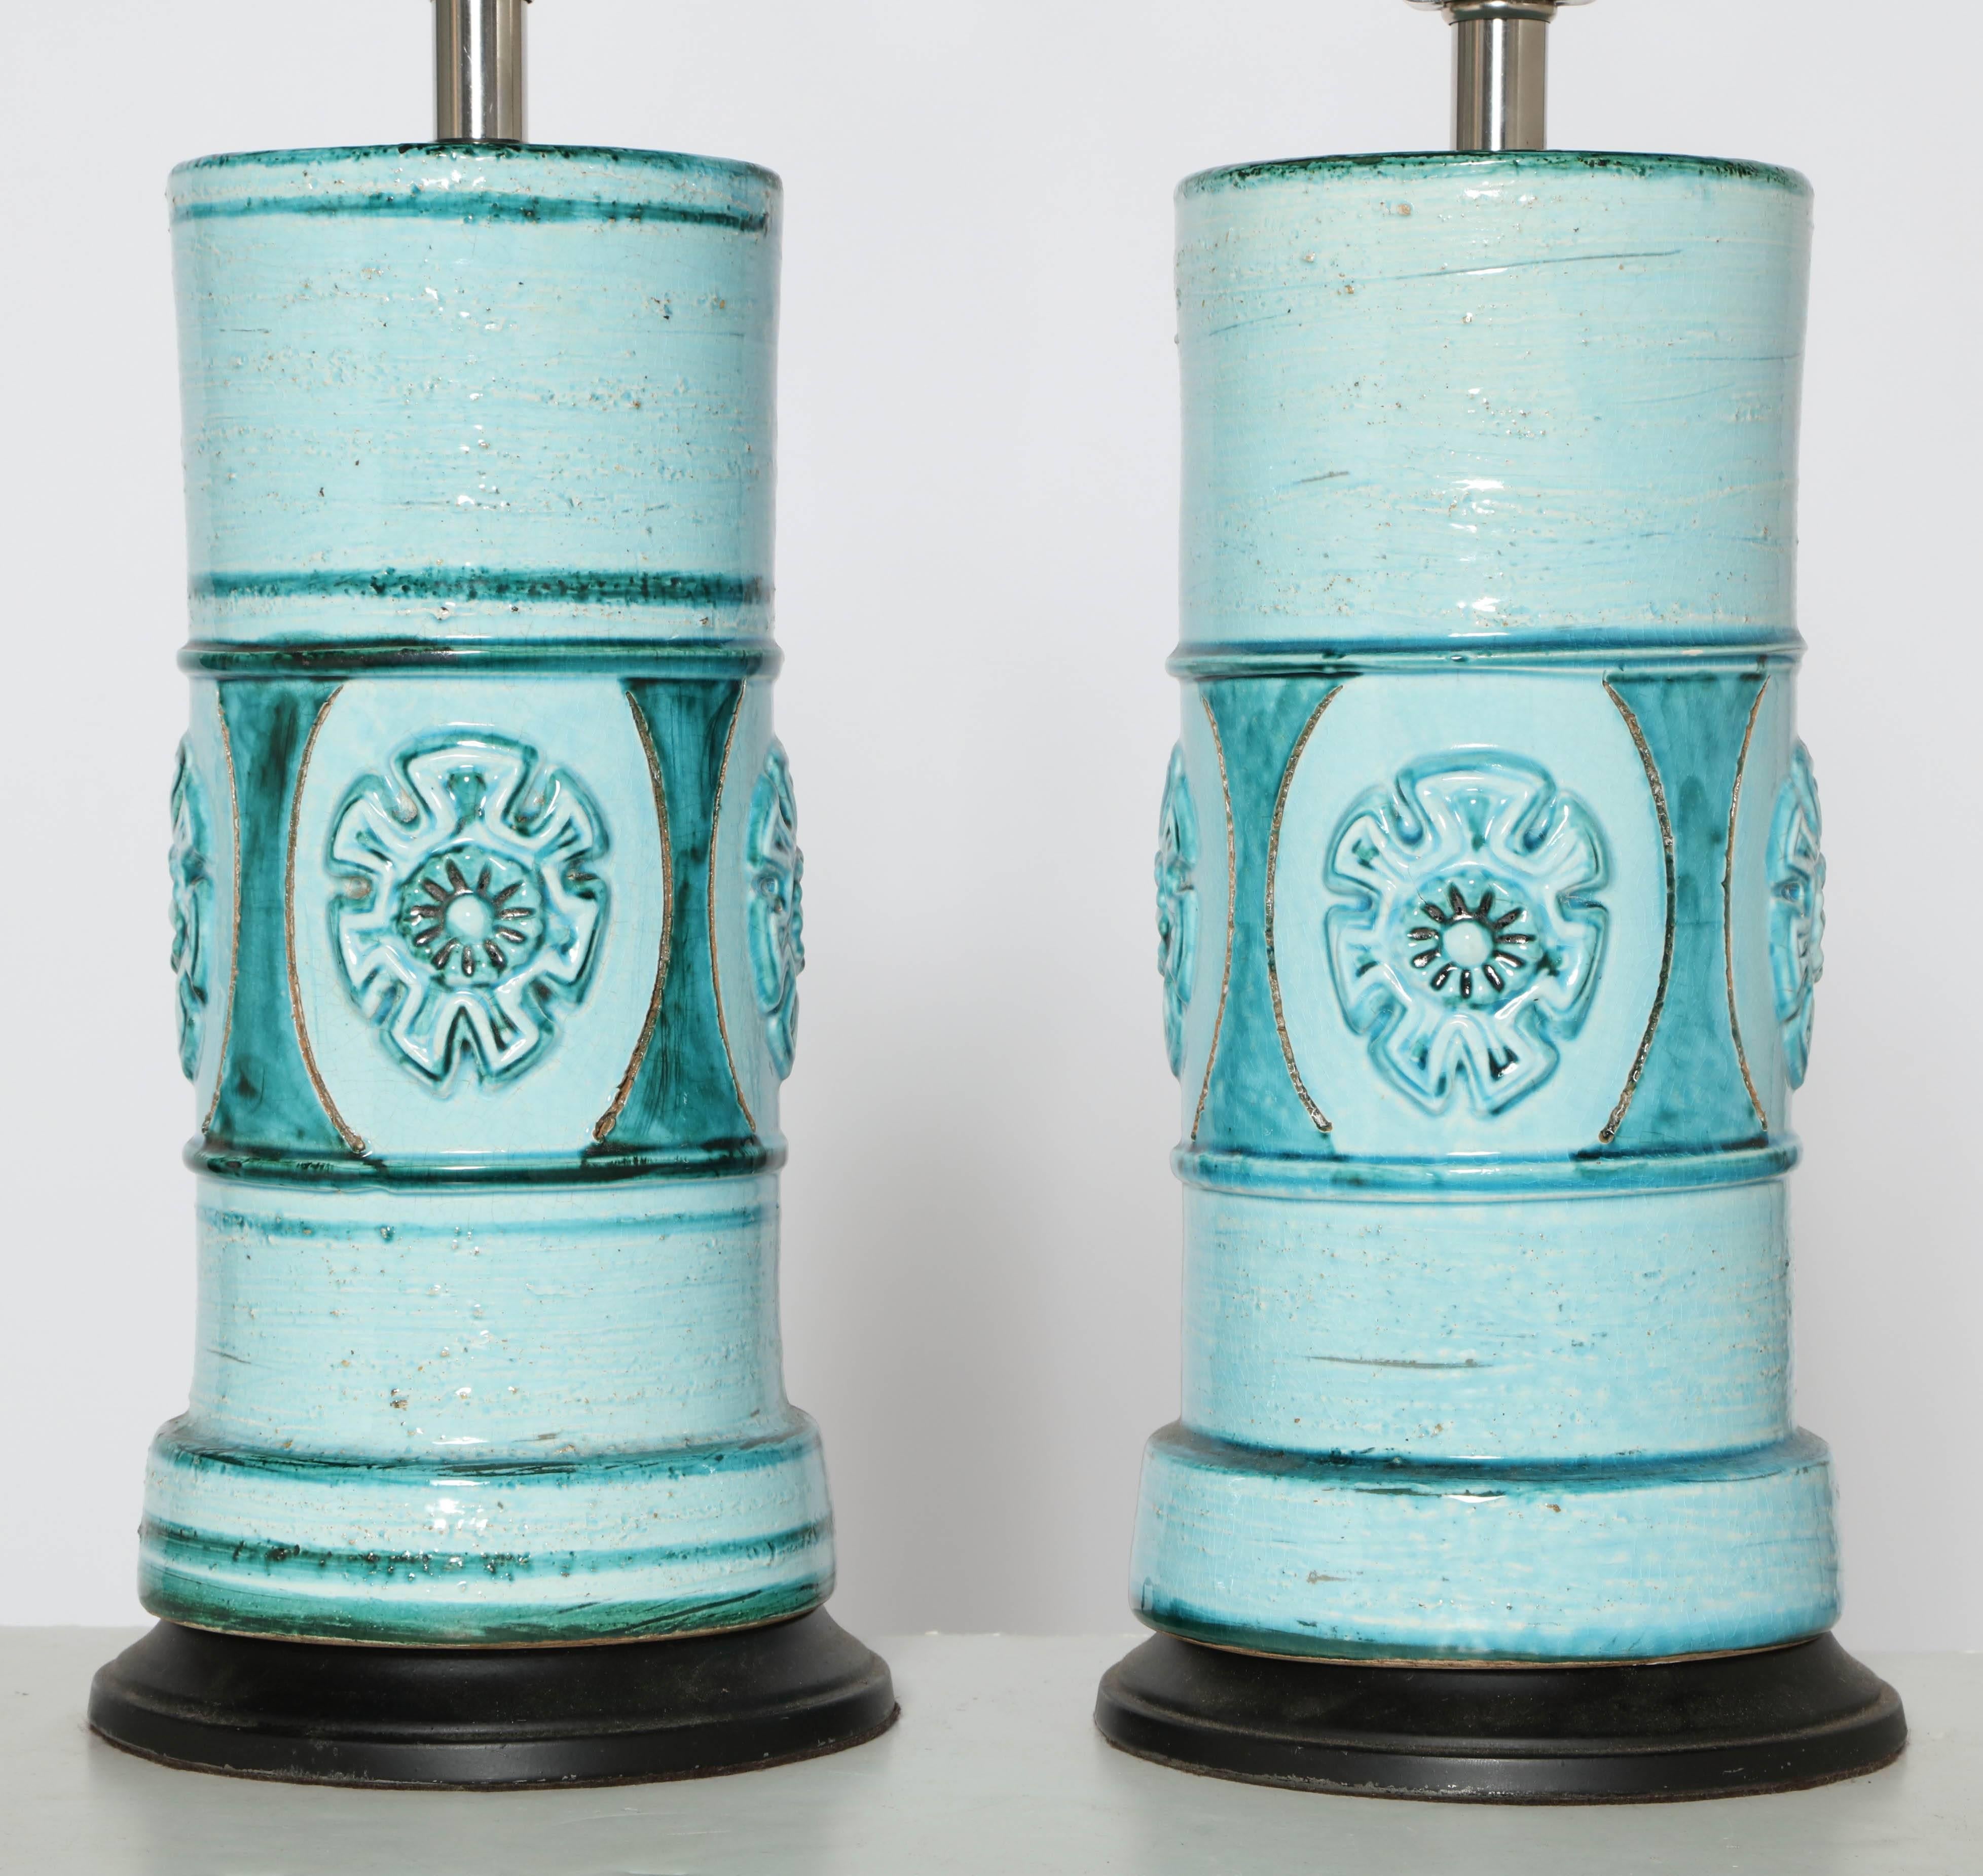 Pair of 1950s Aldo Londi for Bitossi Ocean Blue Glazed Ceramic Table Lamps.  Featuring a cylindrical form with raised floral design in Seaside shades of Turquoise, Pale Turquoise, Aqua and Light Aqua. On a round 6.5D Black enameled metal base.